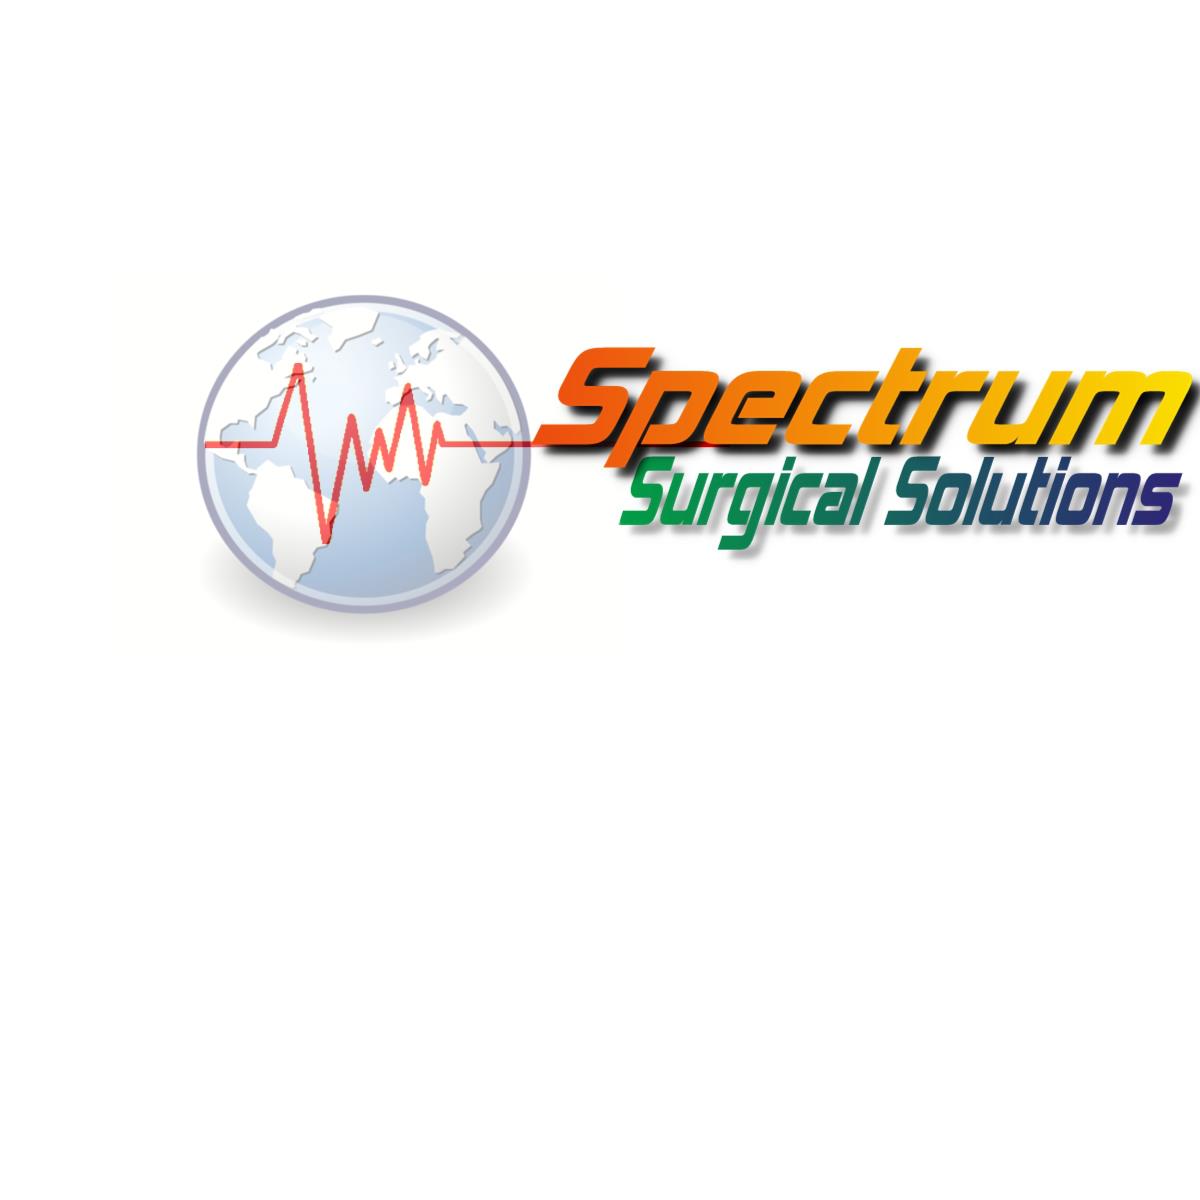 Spectrum Surgical Solutions